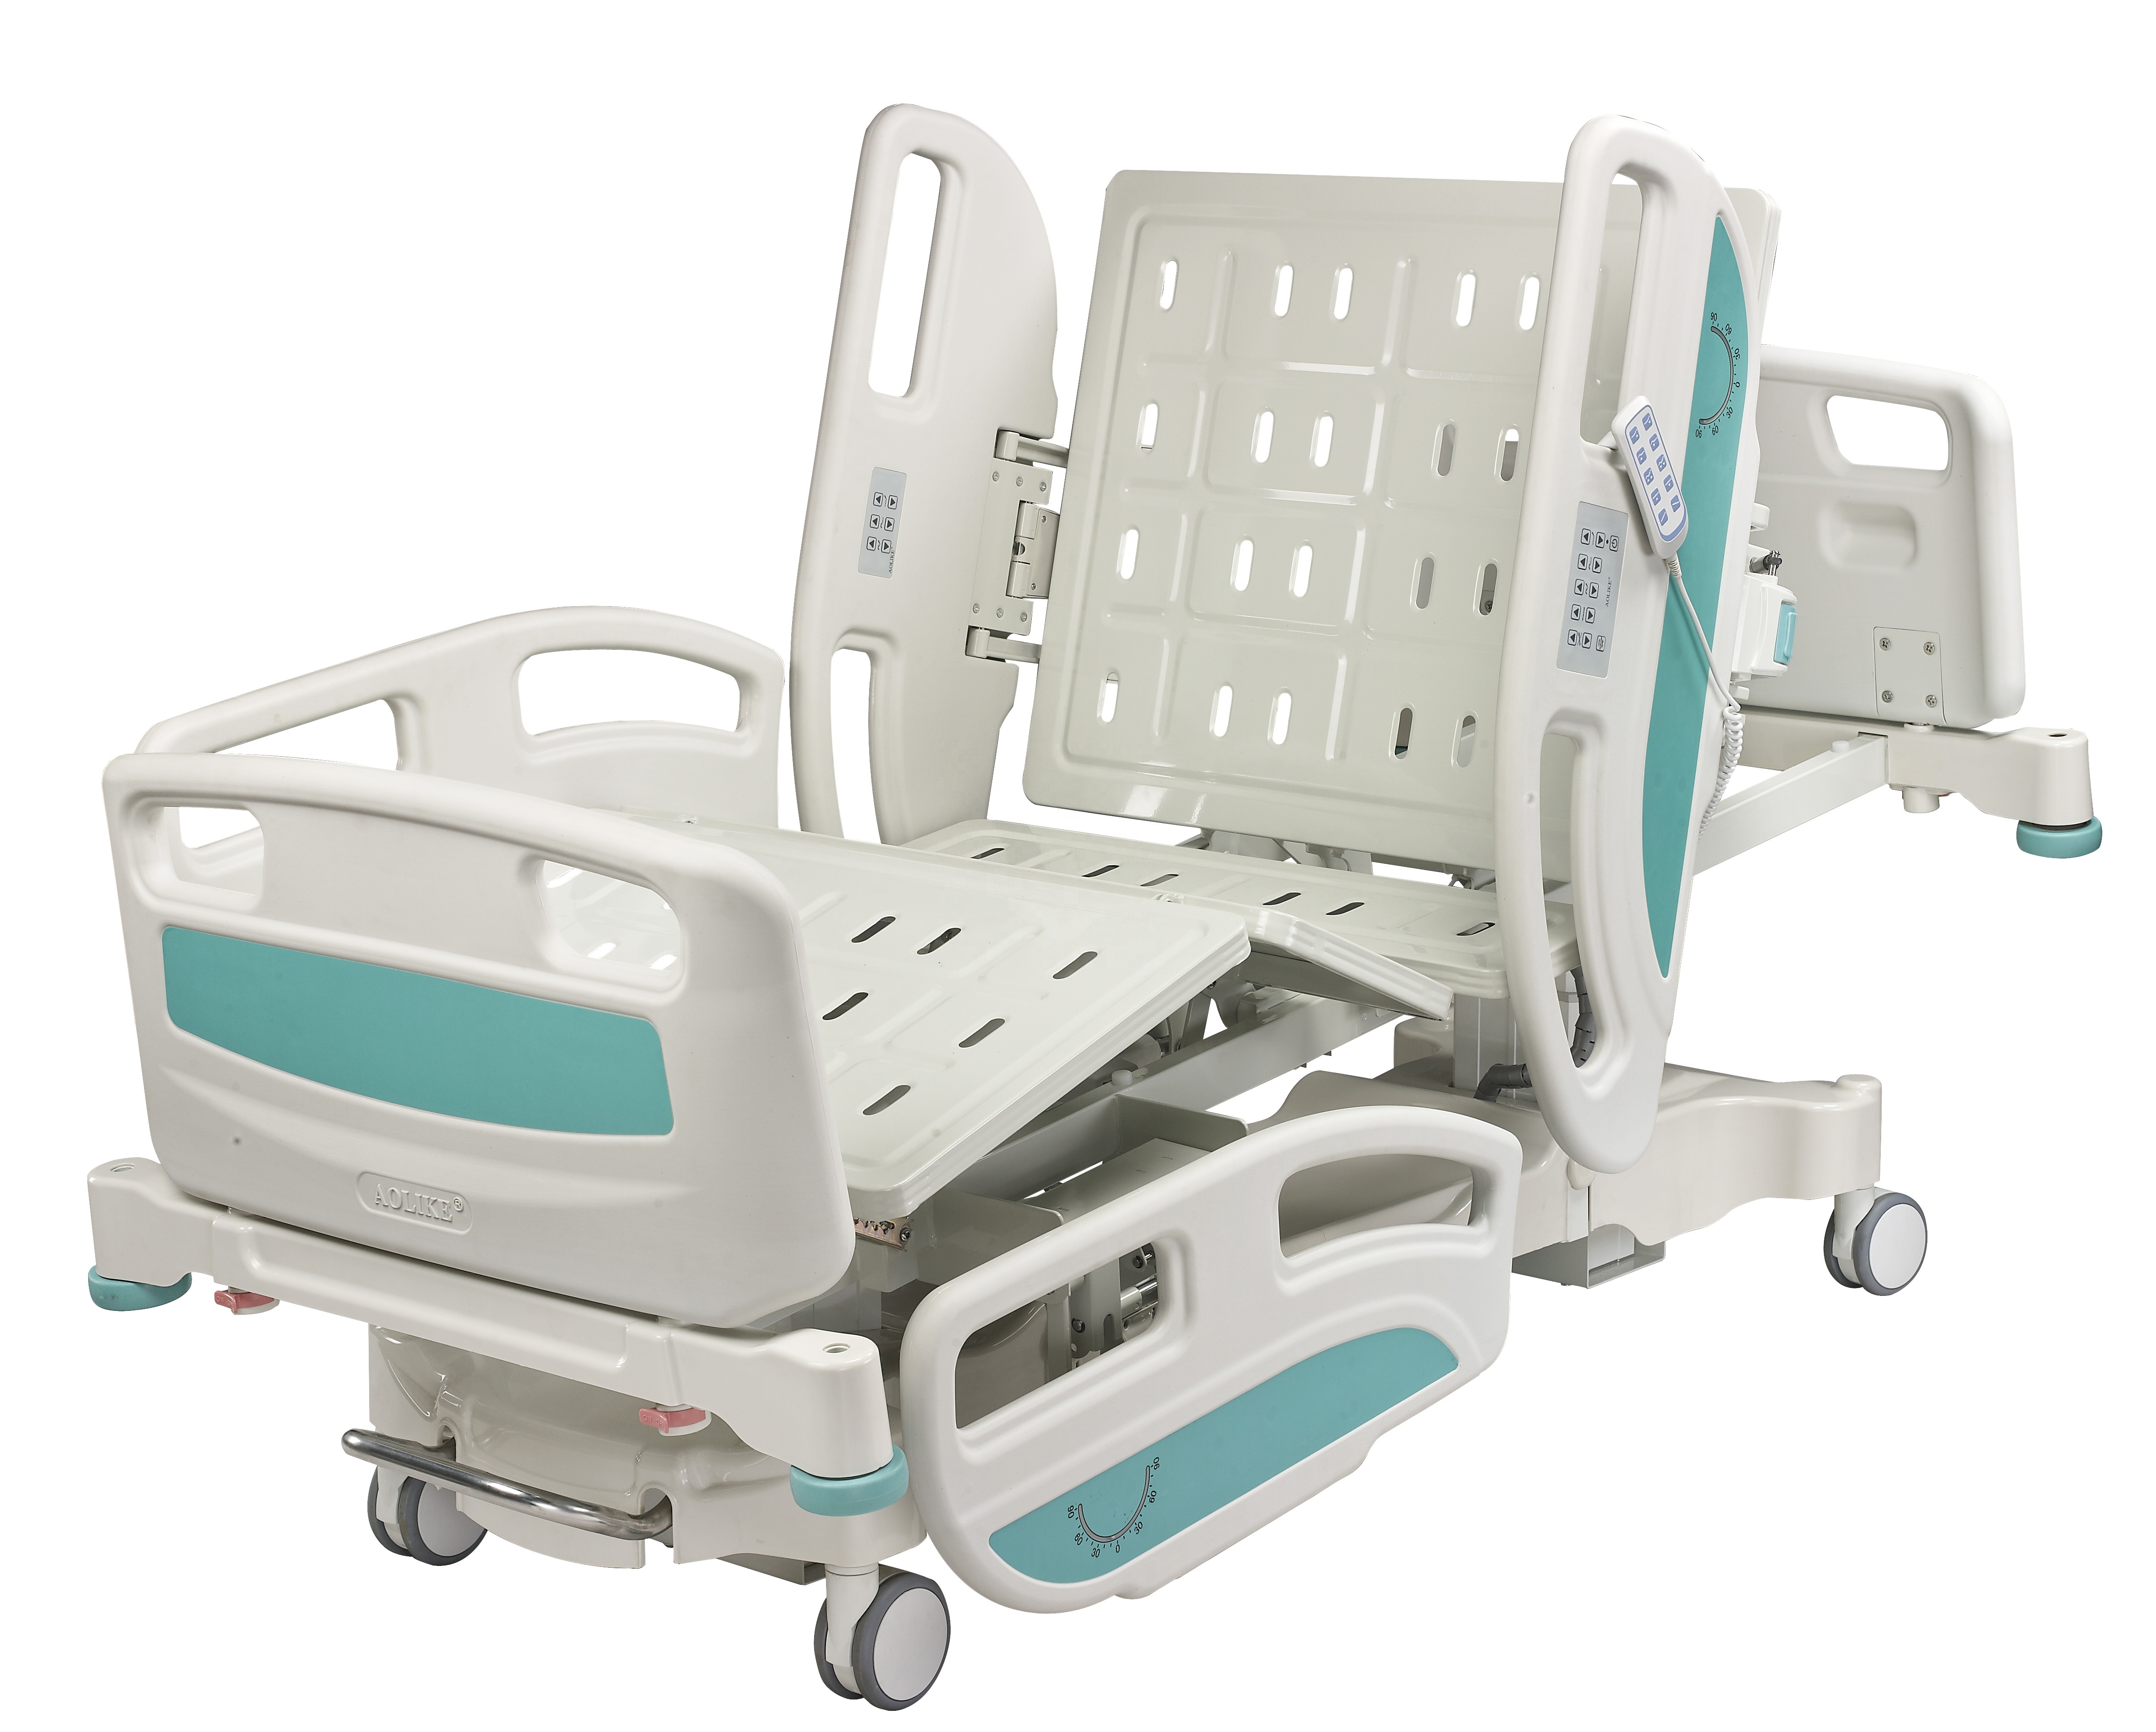 Five function electric ICU Cama hospital Electrica bed For Mobile Hospitals